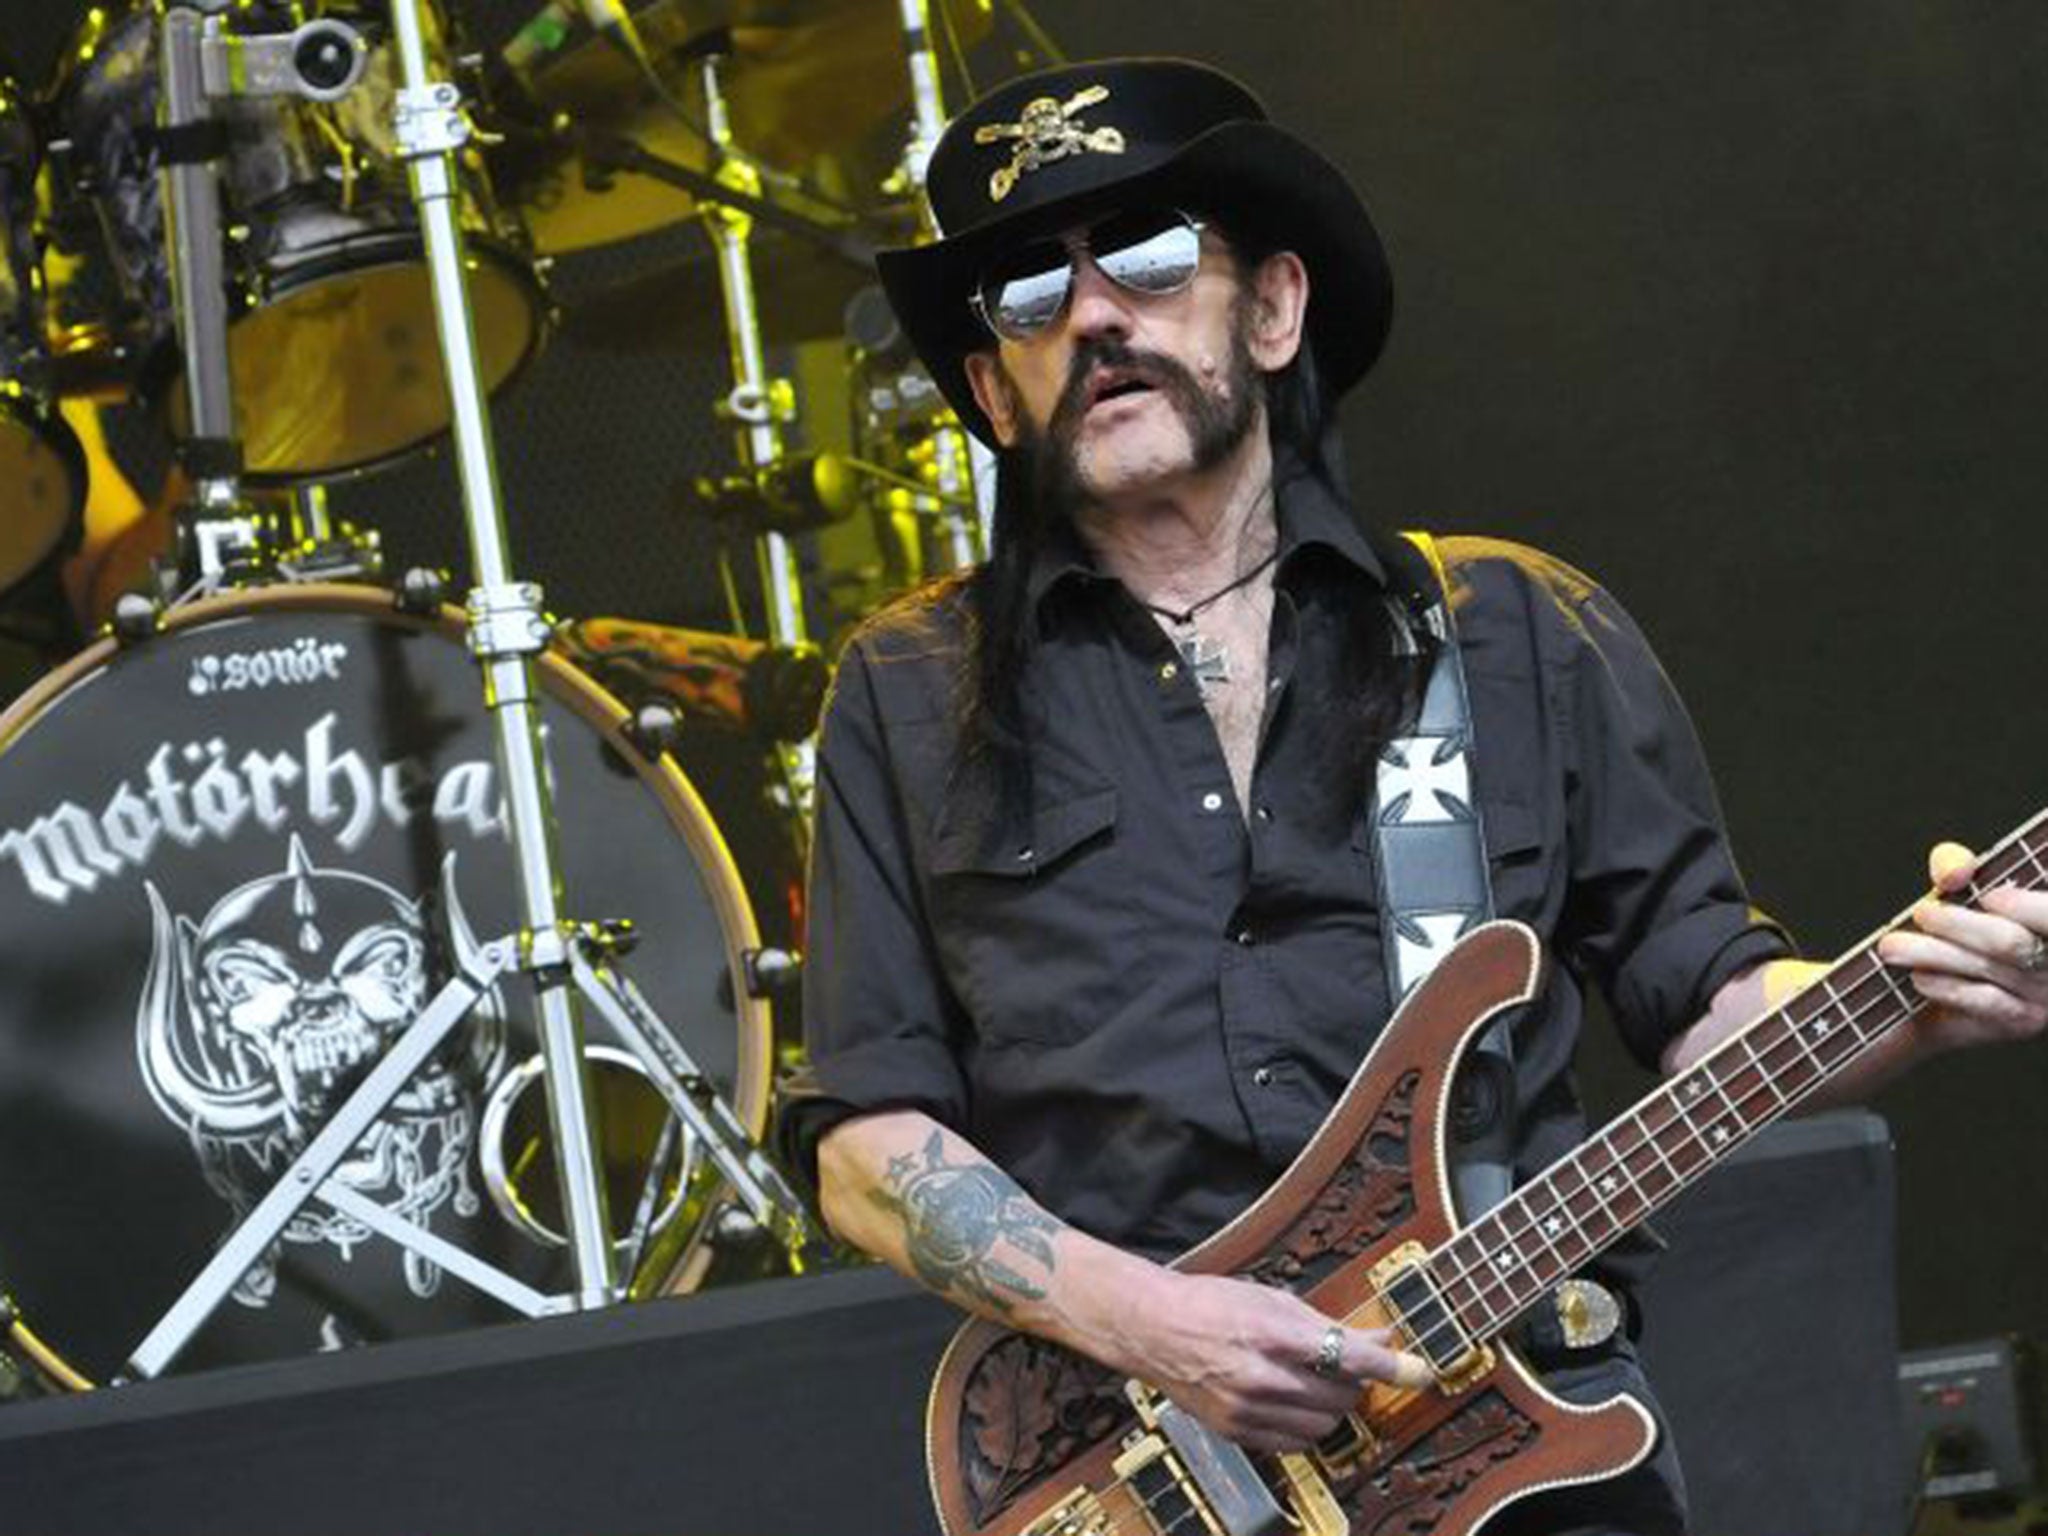 Lemmy Kilmister of Motorhead performs live on the Pyramid stage during the first day of the Glastonbury Festival